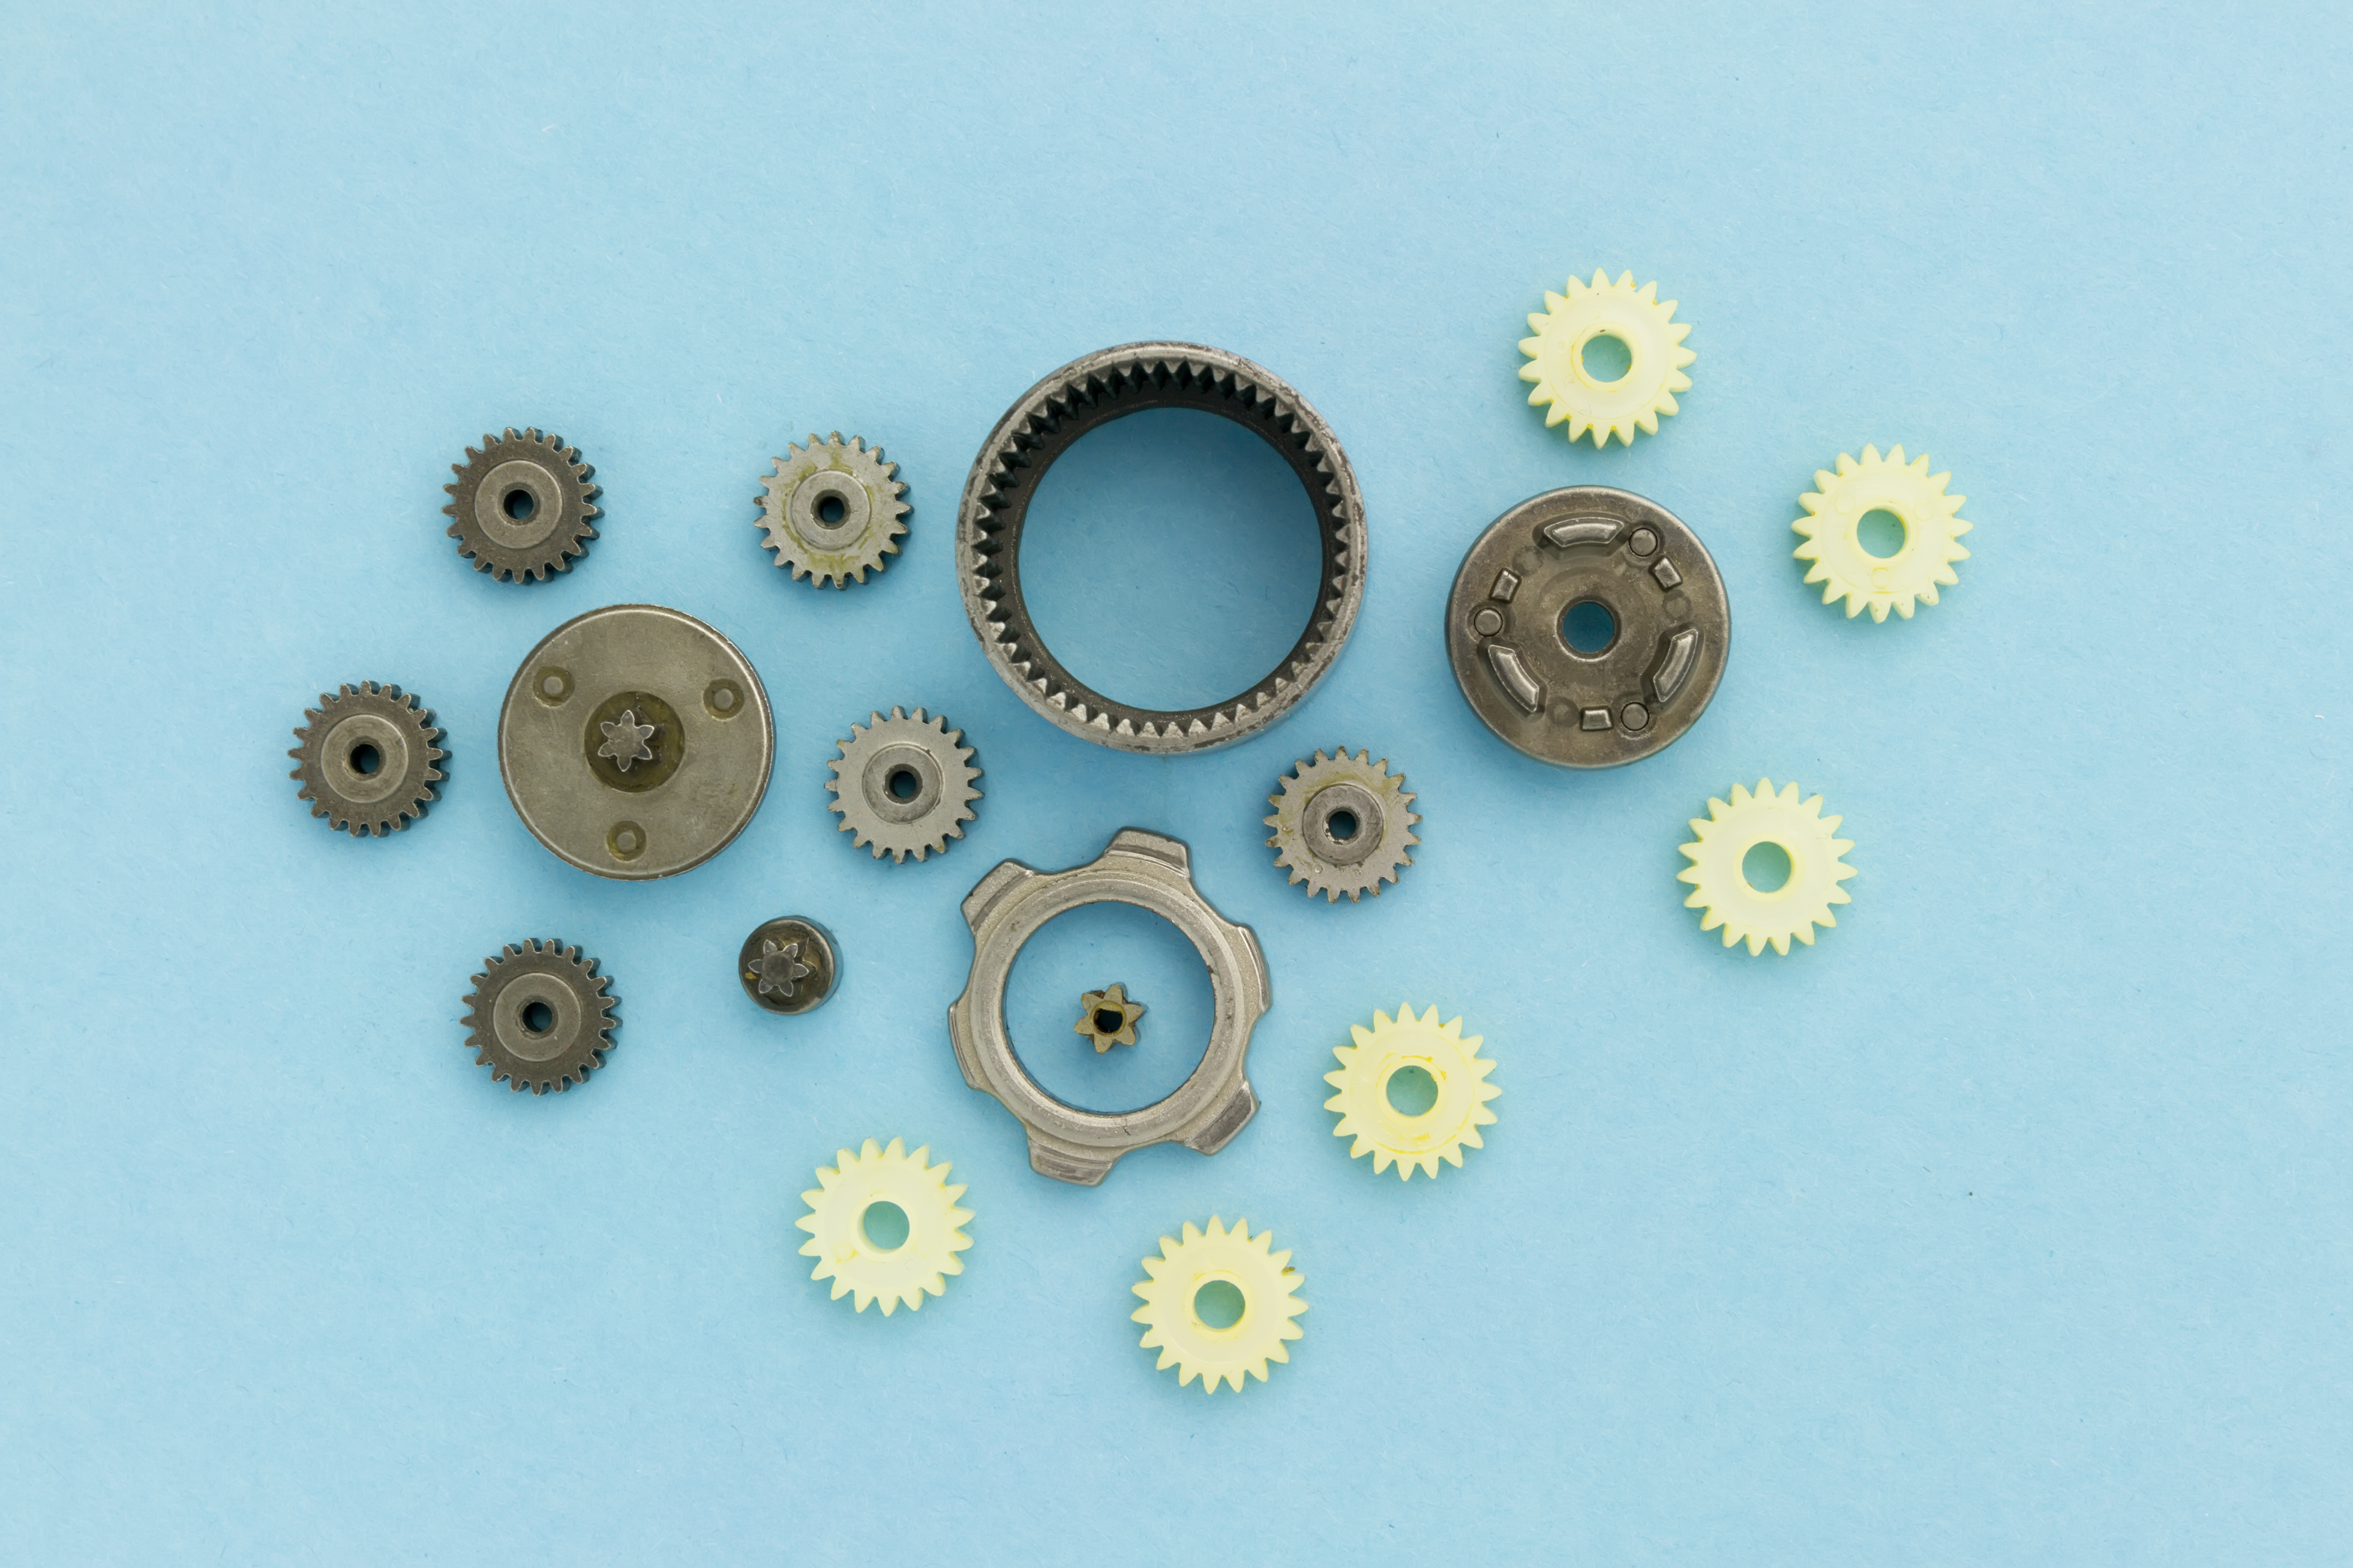 Metal and palstic gears of dismantled mechanism laying on blue background